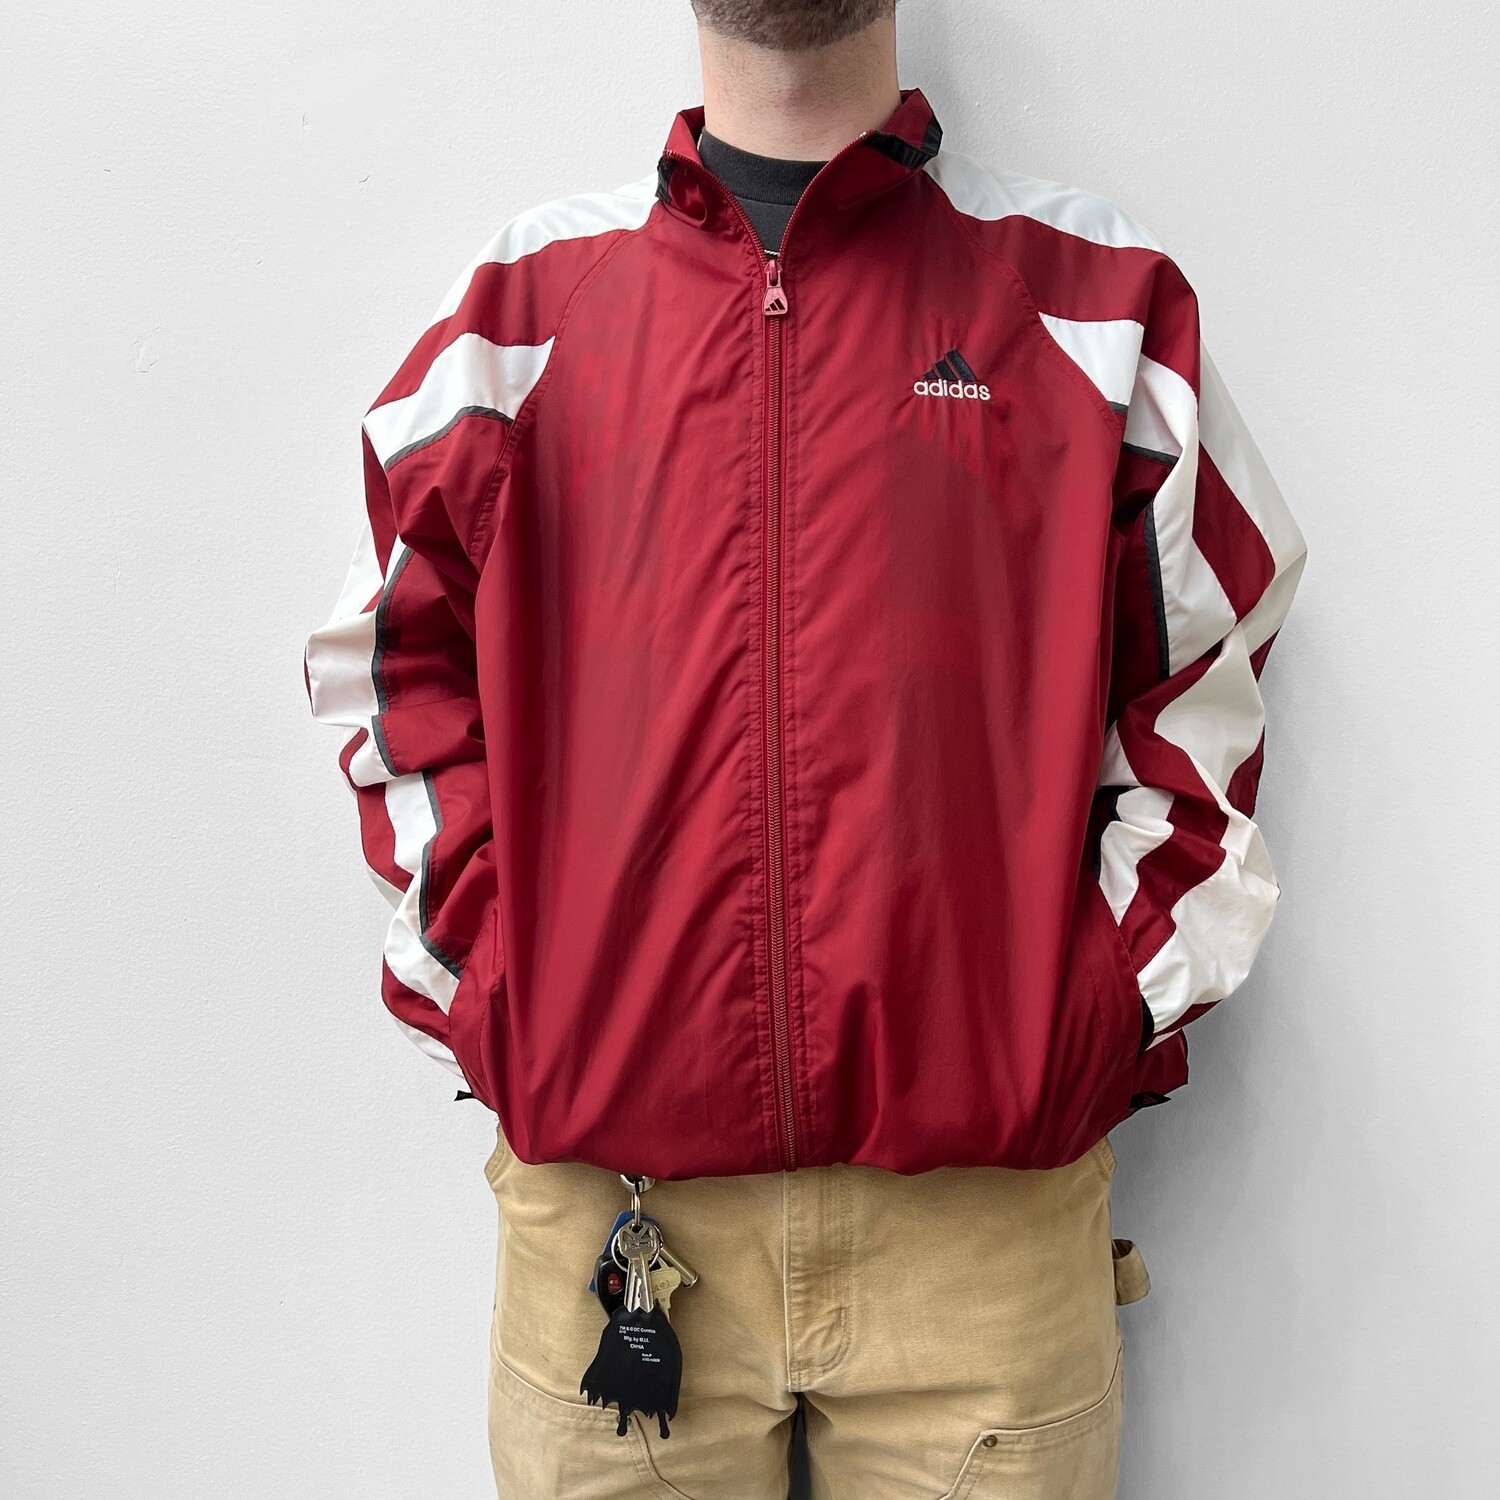 Vintage Adidas Red &amp; White Windbreaker, Size: Large, Color: Red, Style: Windbreaker